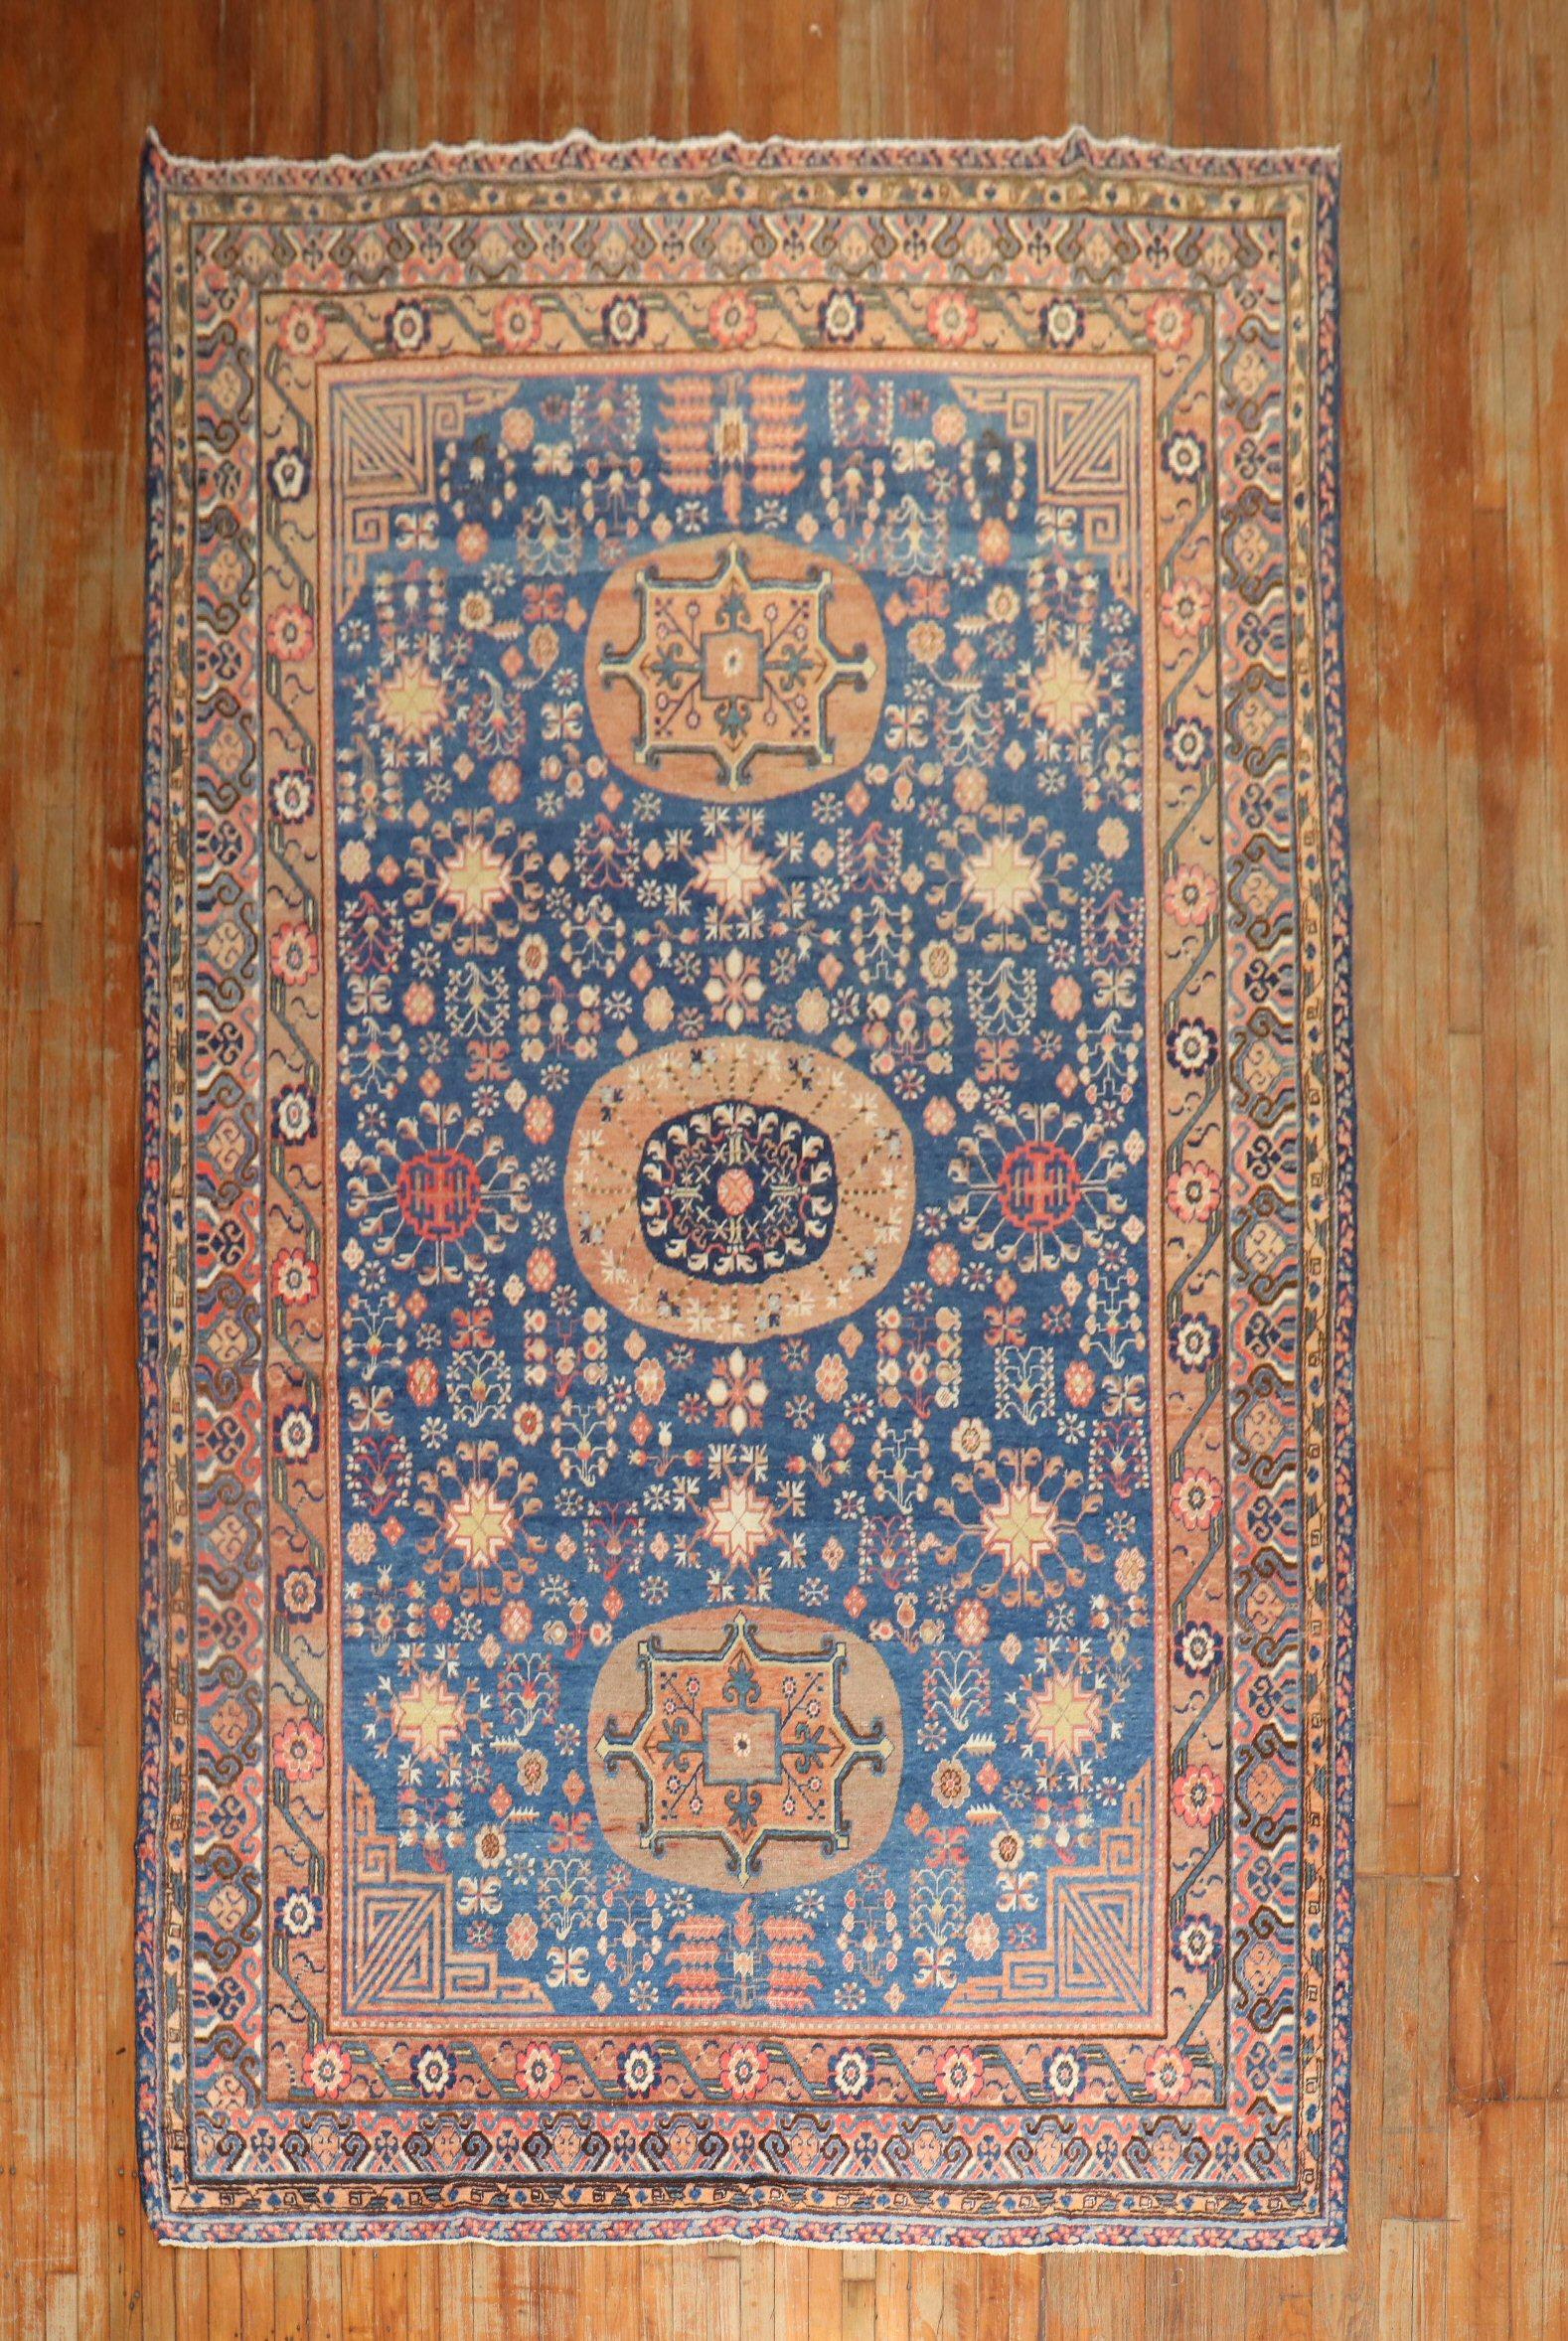 An early 20th century Khotan gallery size rug.

Measures: 6'10